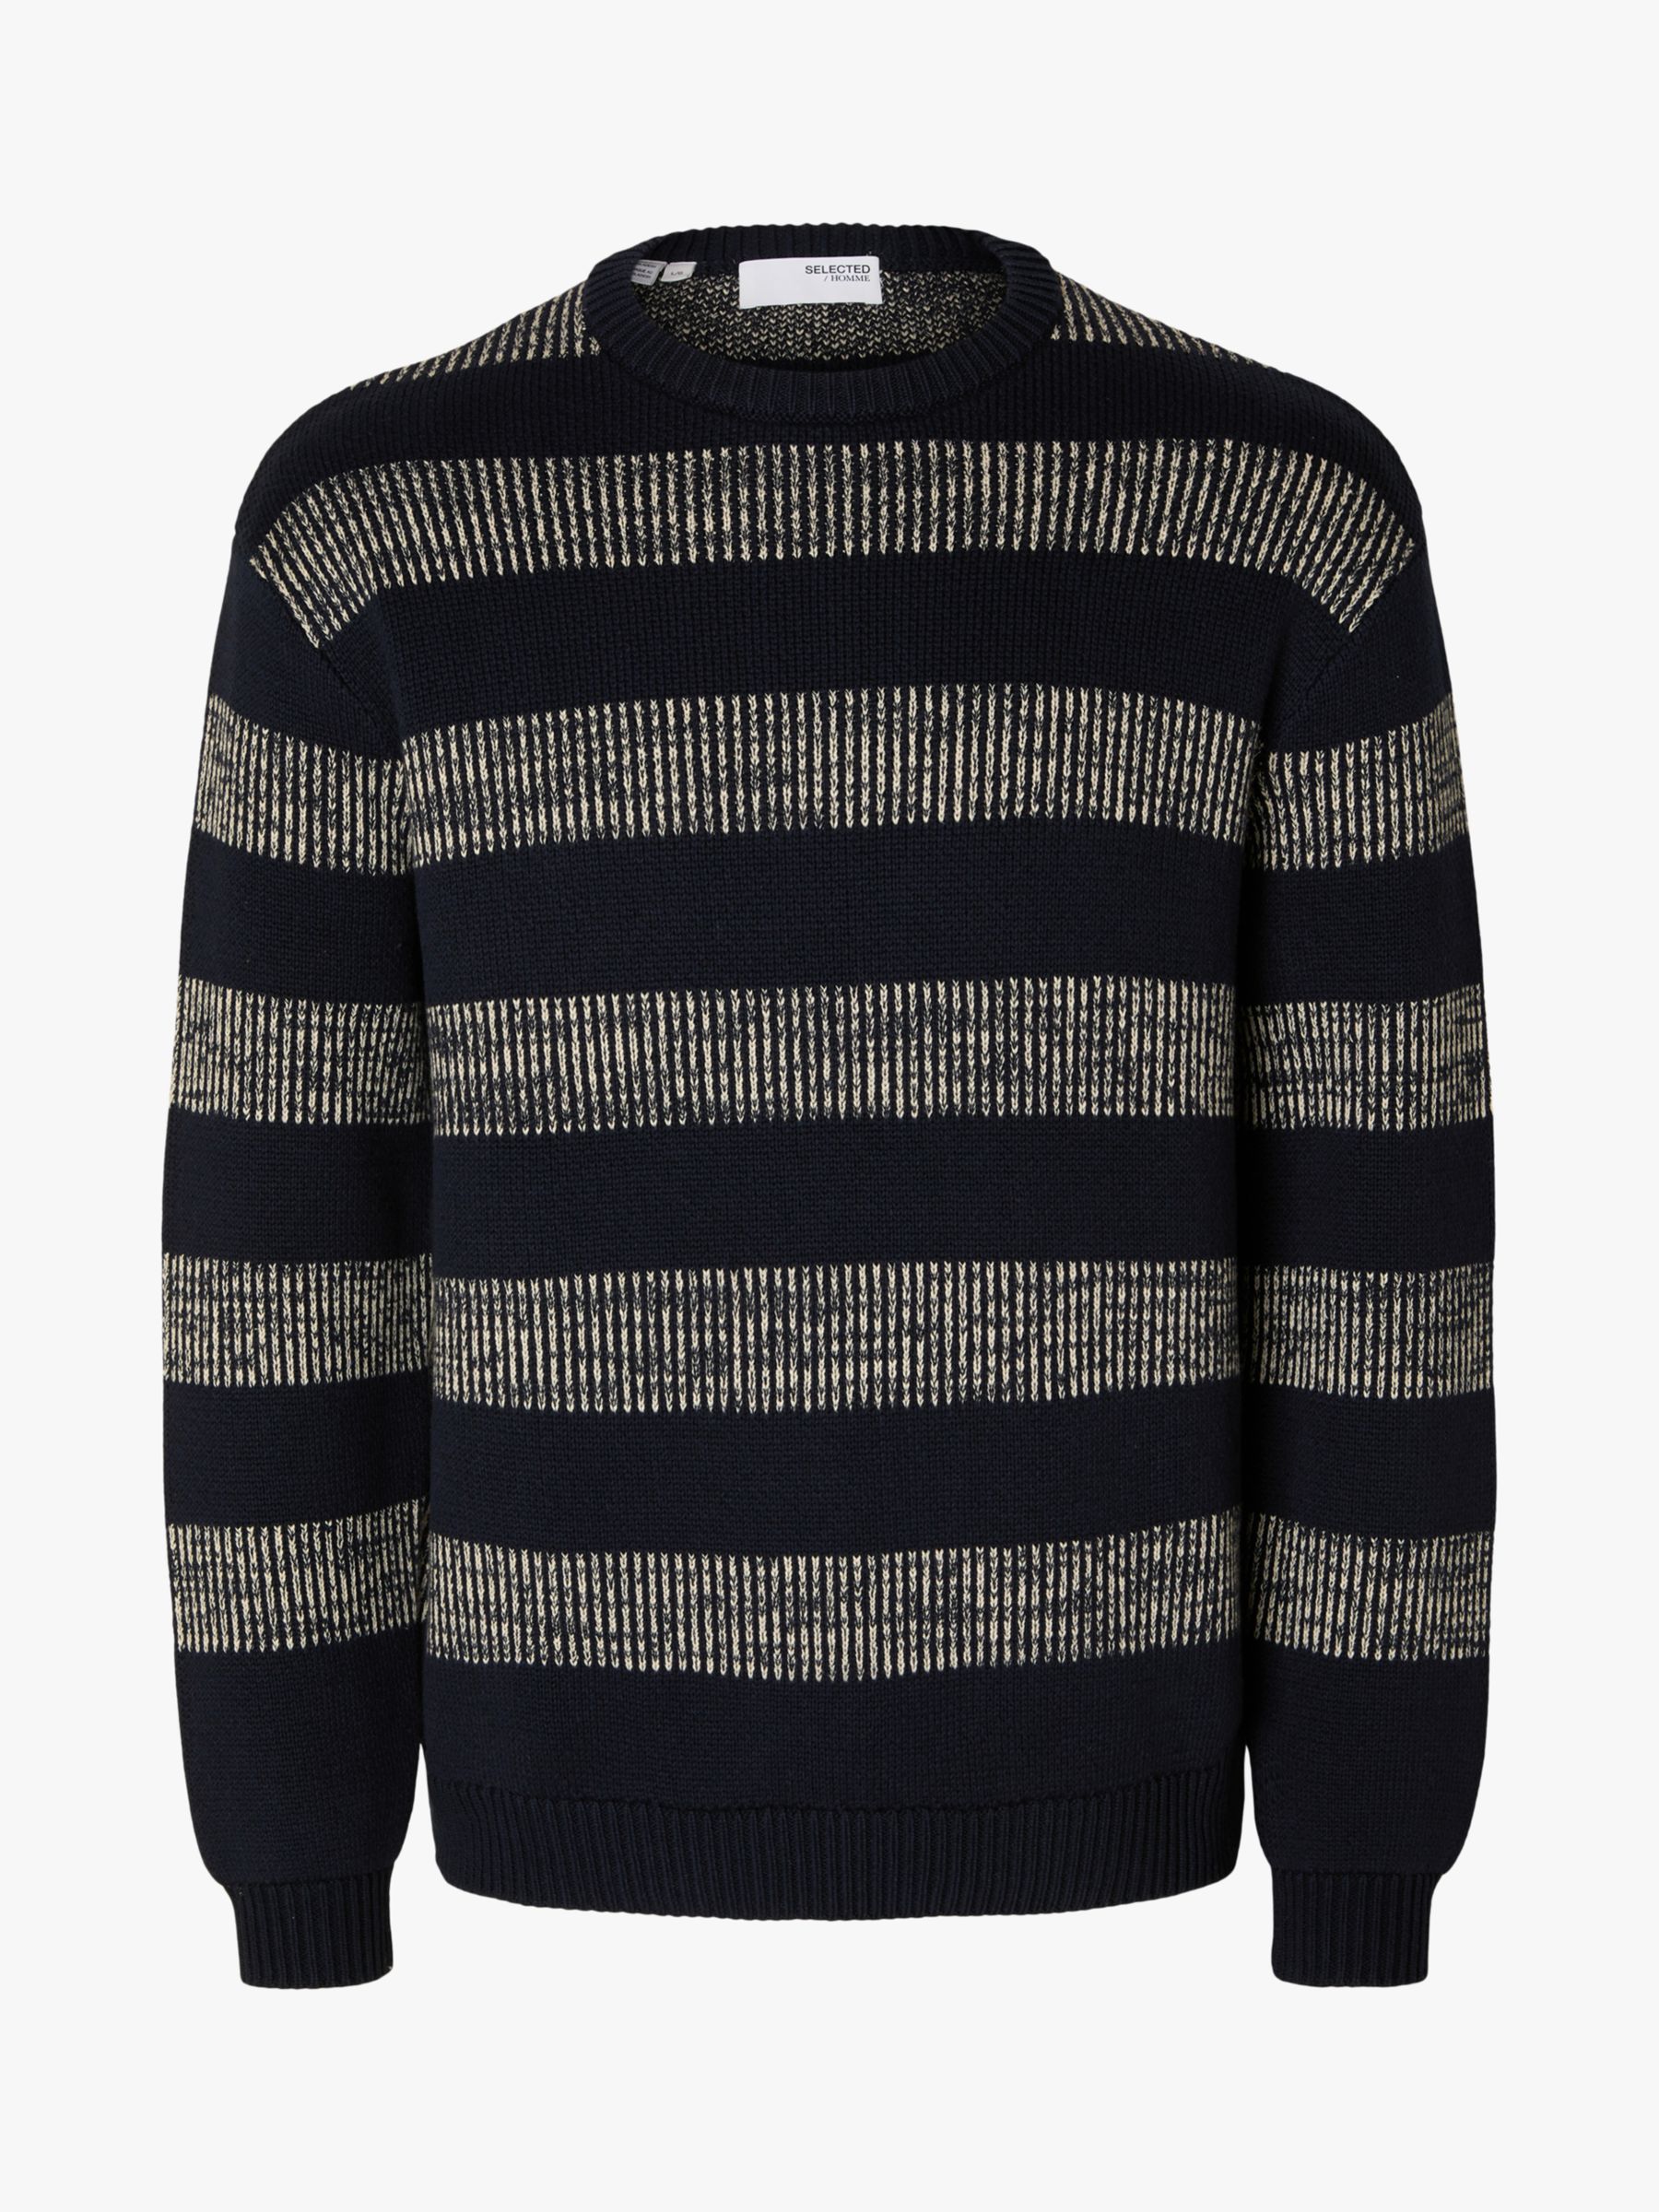 SELECTED HOMME Knitted Pullover Jumper, Black/Multi, S